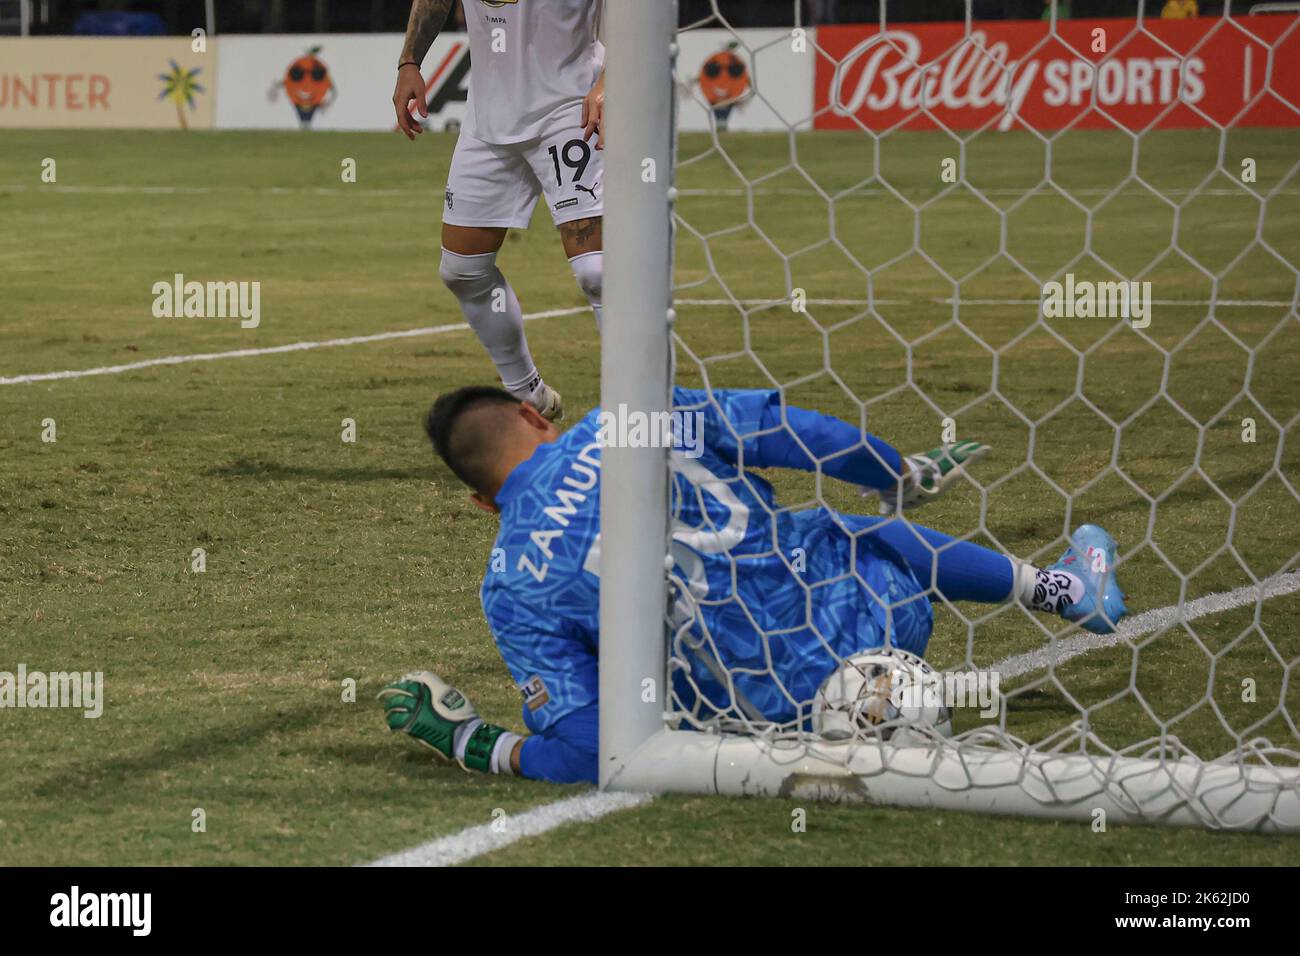 St. Petersburg, FL: Loudon United FC goalkeeper Luis Zamudio (50) is unable to stop by Tampa Bay Rowdies forward Jake LaCava (19)  who scored the four Stock Photo